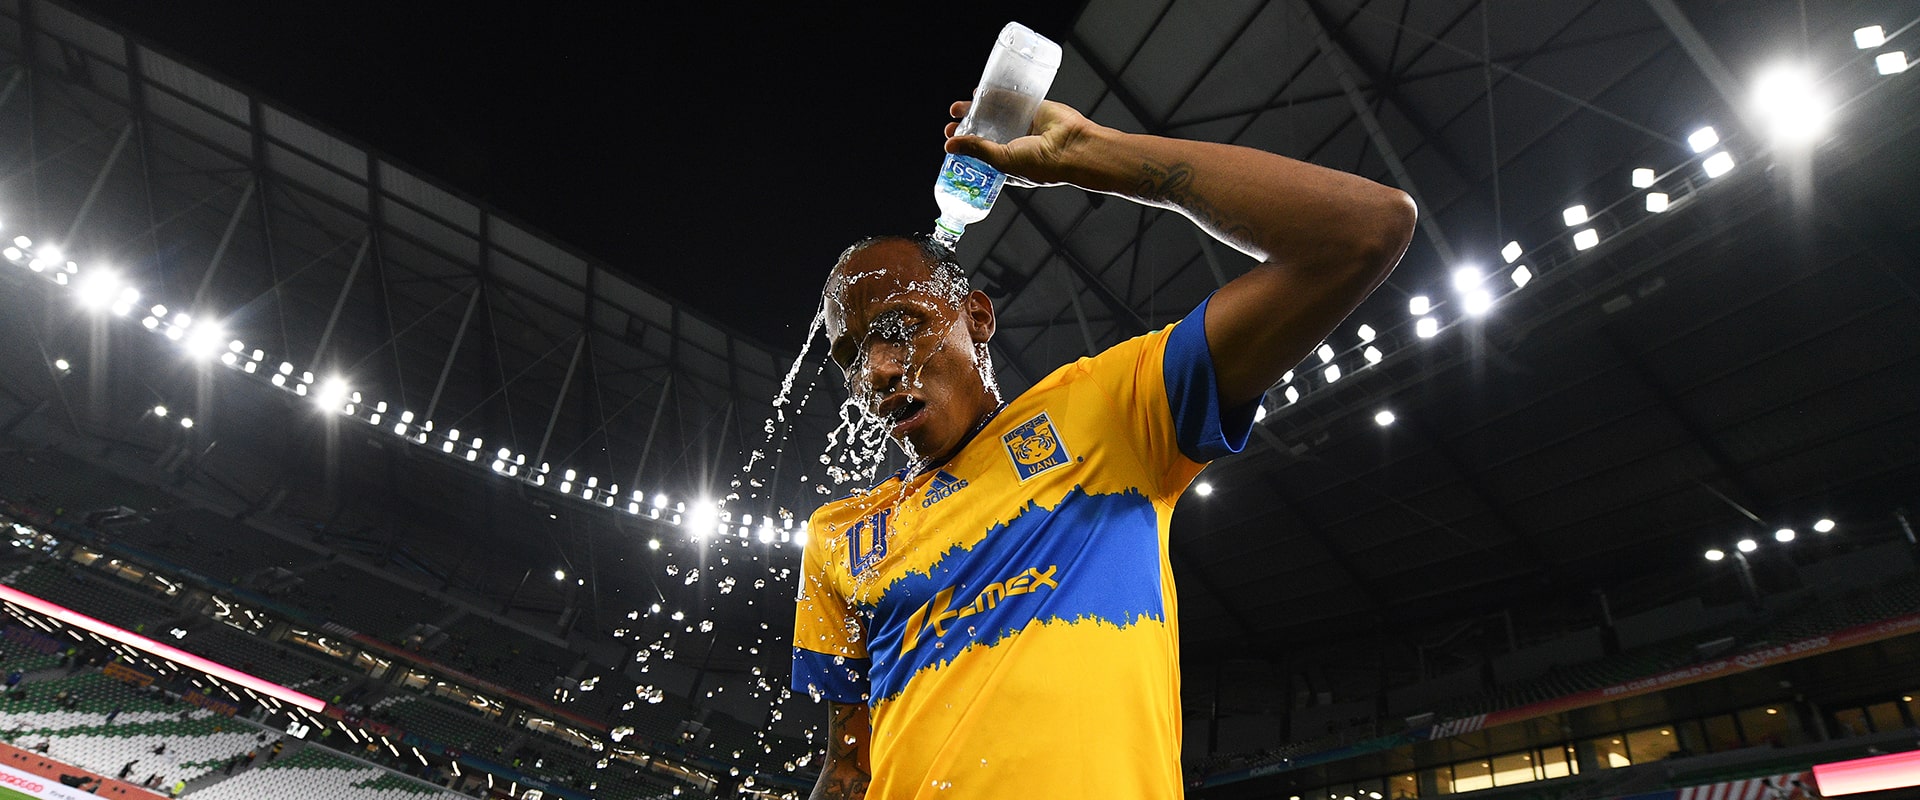 Luis Quinones of Tigres UANL pours water on himself during the Fifa Club World Cup semi-final at the Qatar Education City Stadium in February 2021 in Doha.